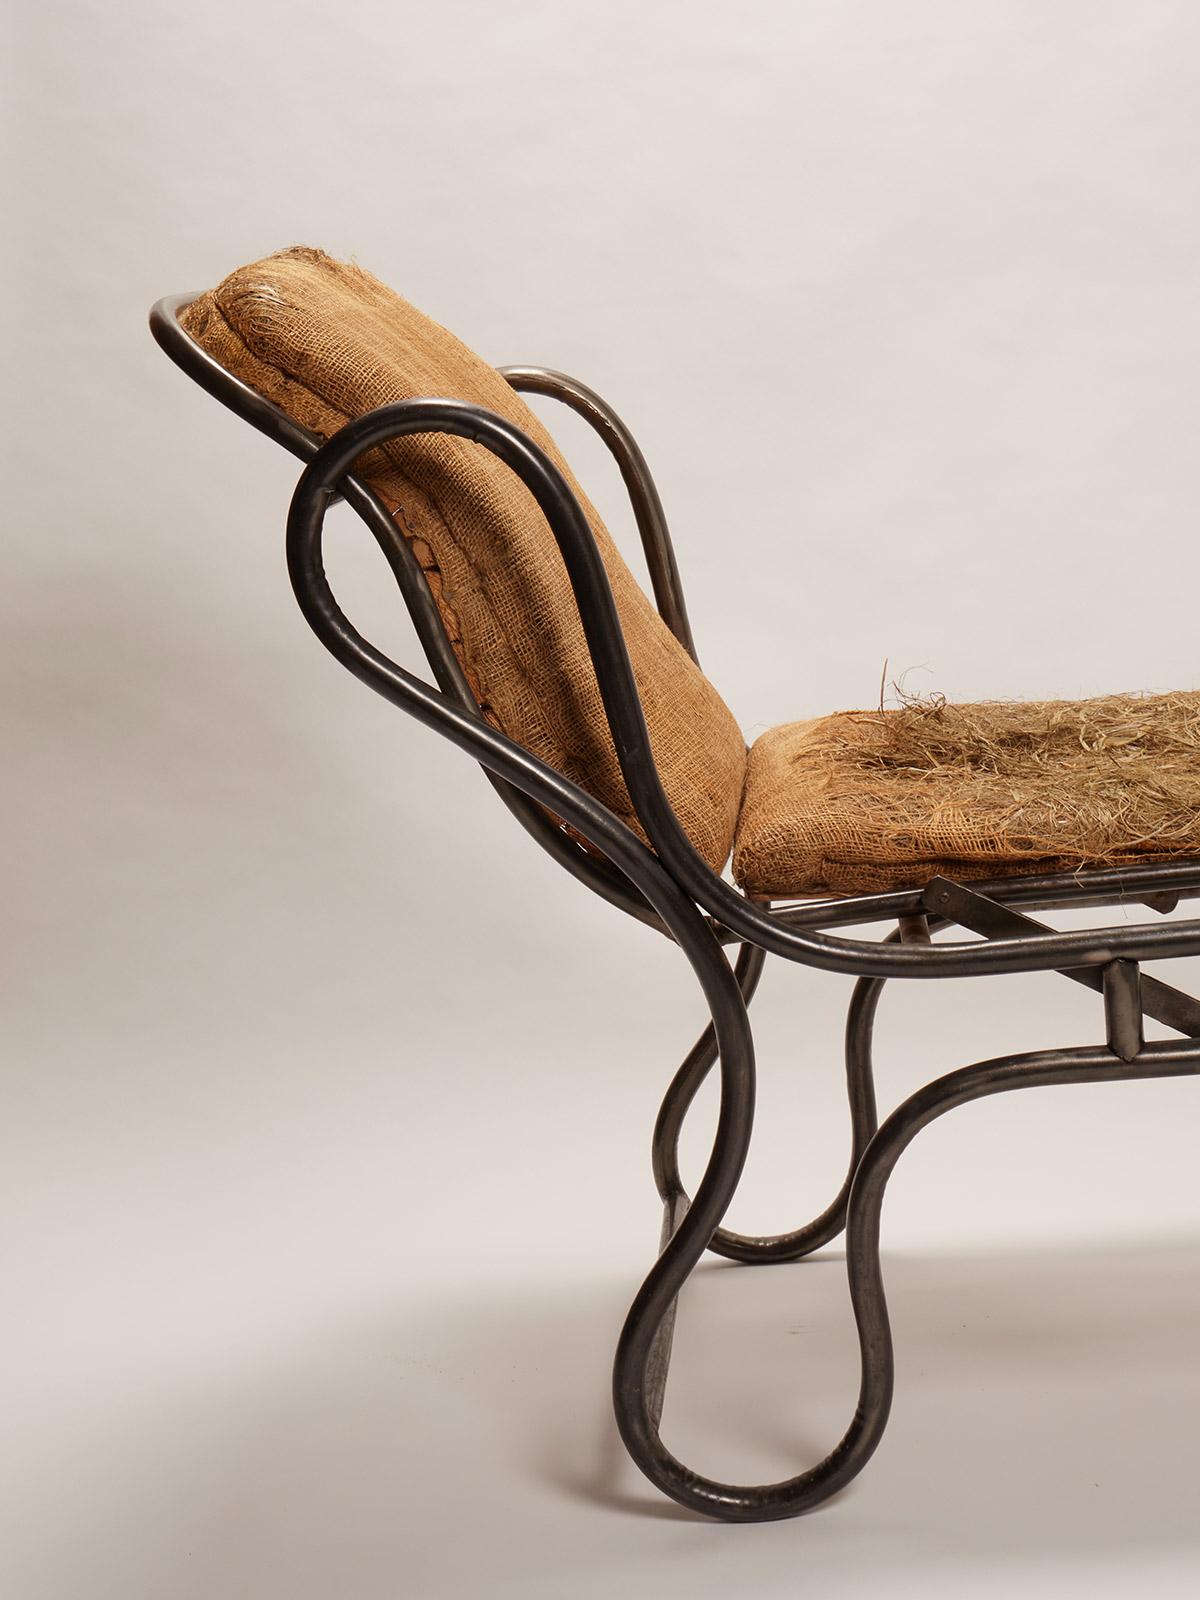 Adjustable chaise-longue. Very rare and unusual example of design for a chaise-longue. The structure is made out of curved iron. By lifting the foot's side of the chaise, the entire bed rise. France, circa 1900.